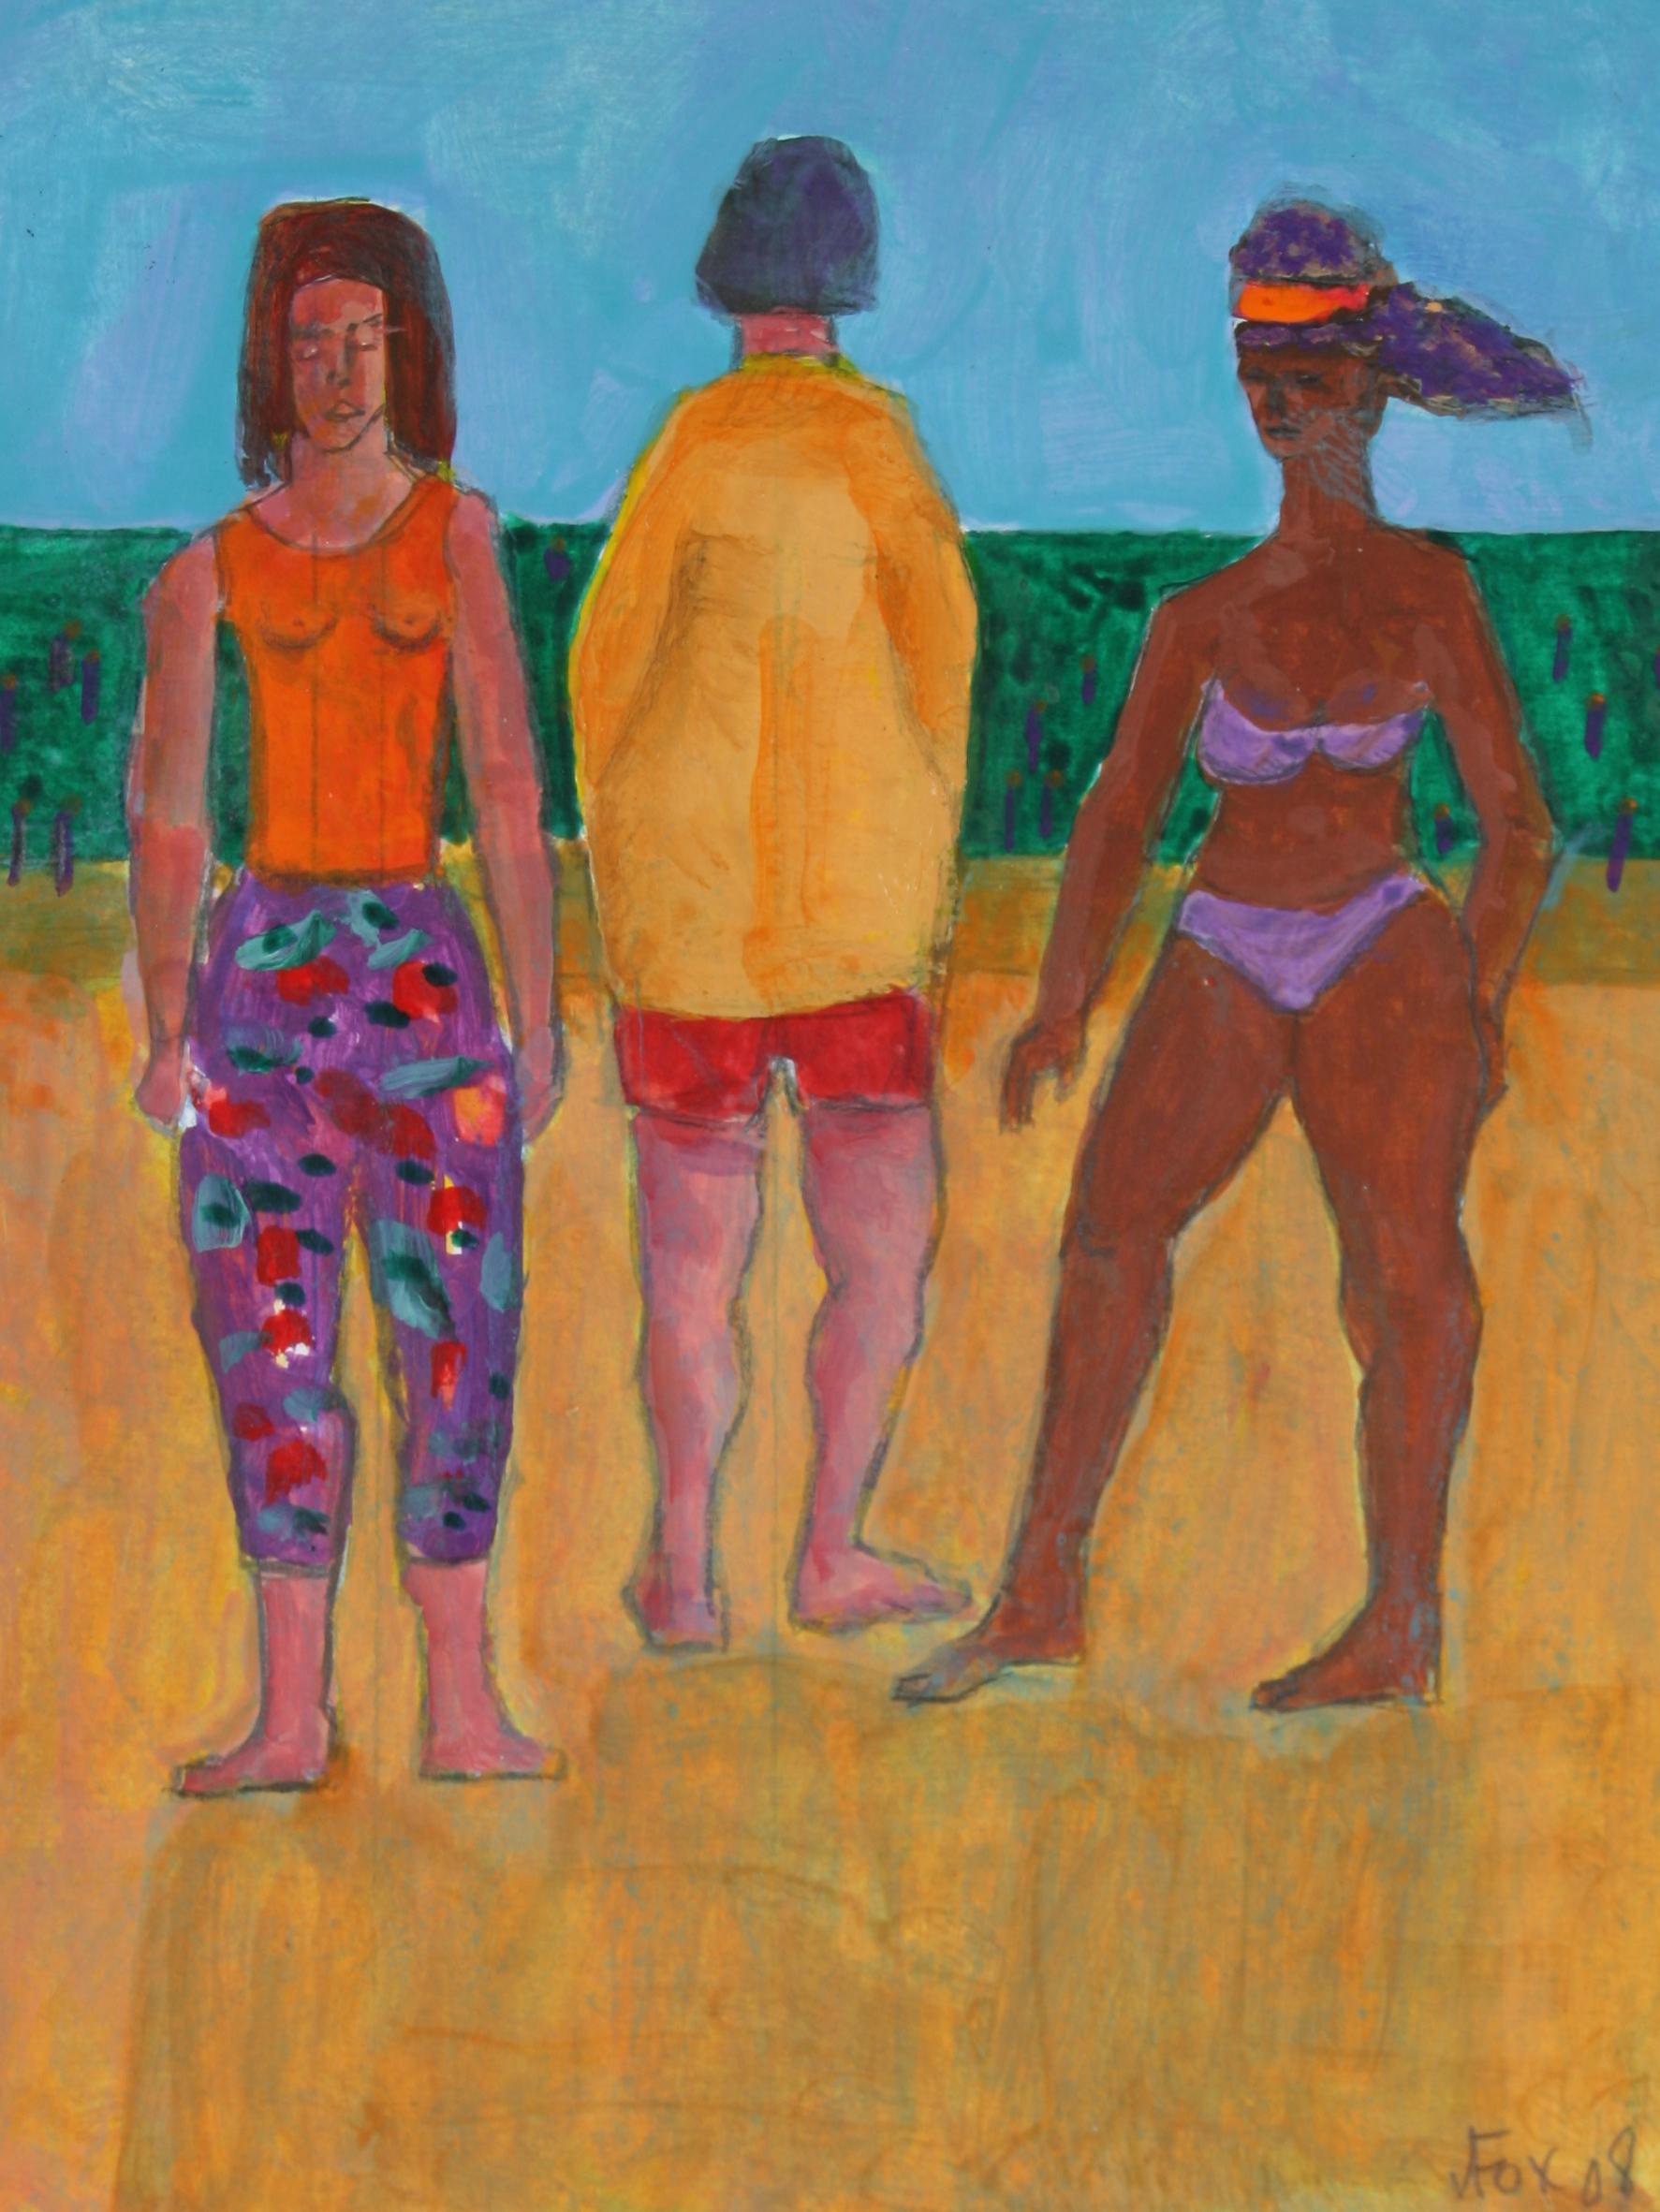 Dave Fox Figurative Painting - "Love Boat Series" Beach Trip in Acrylic and Graphite, 2008